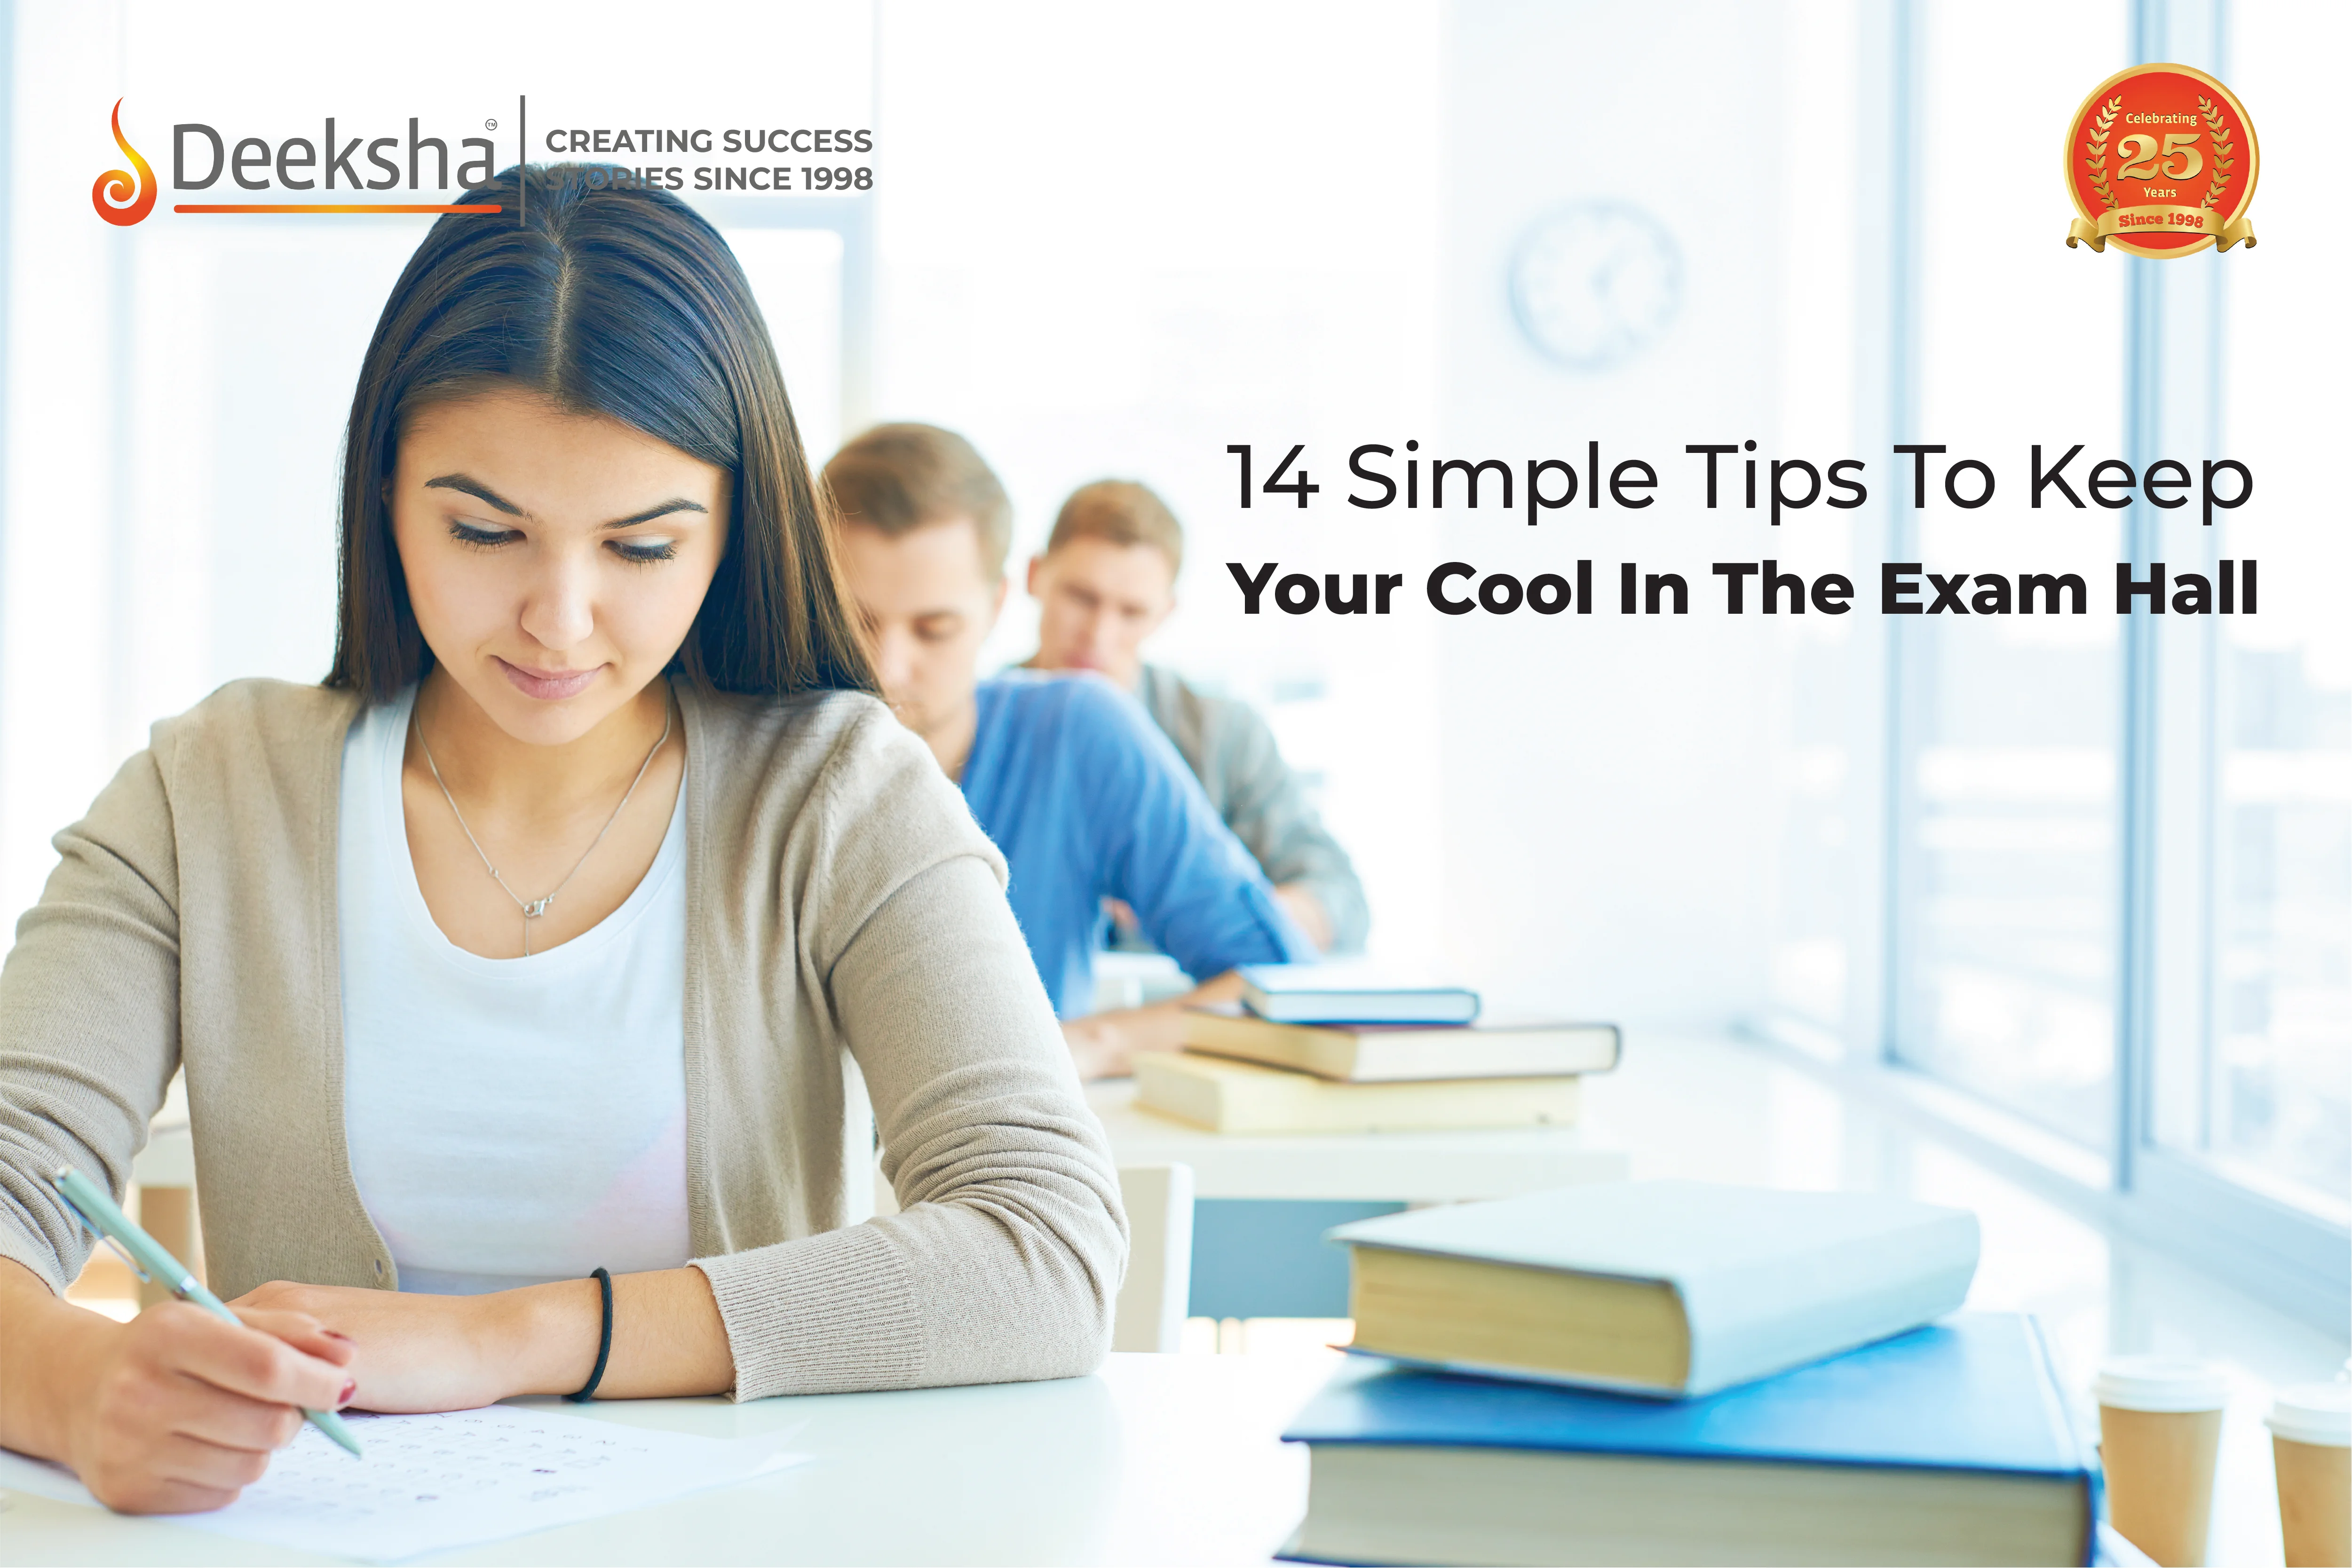 14 Simple Tips To Keep Your Cool In The Exam Hall